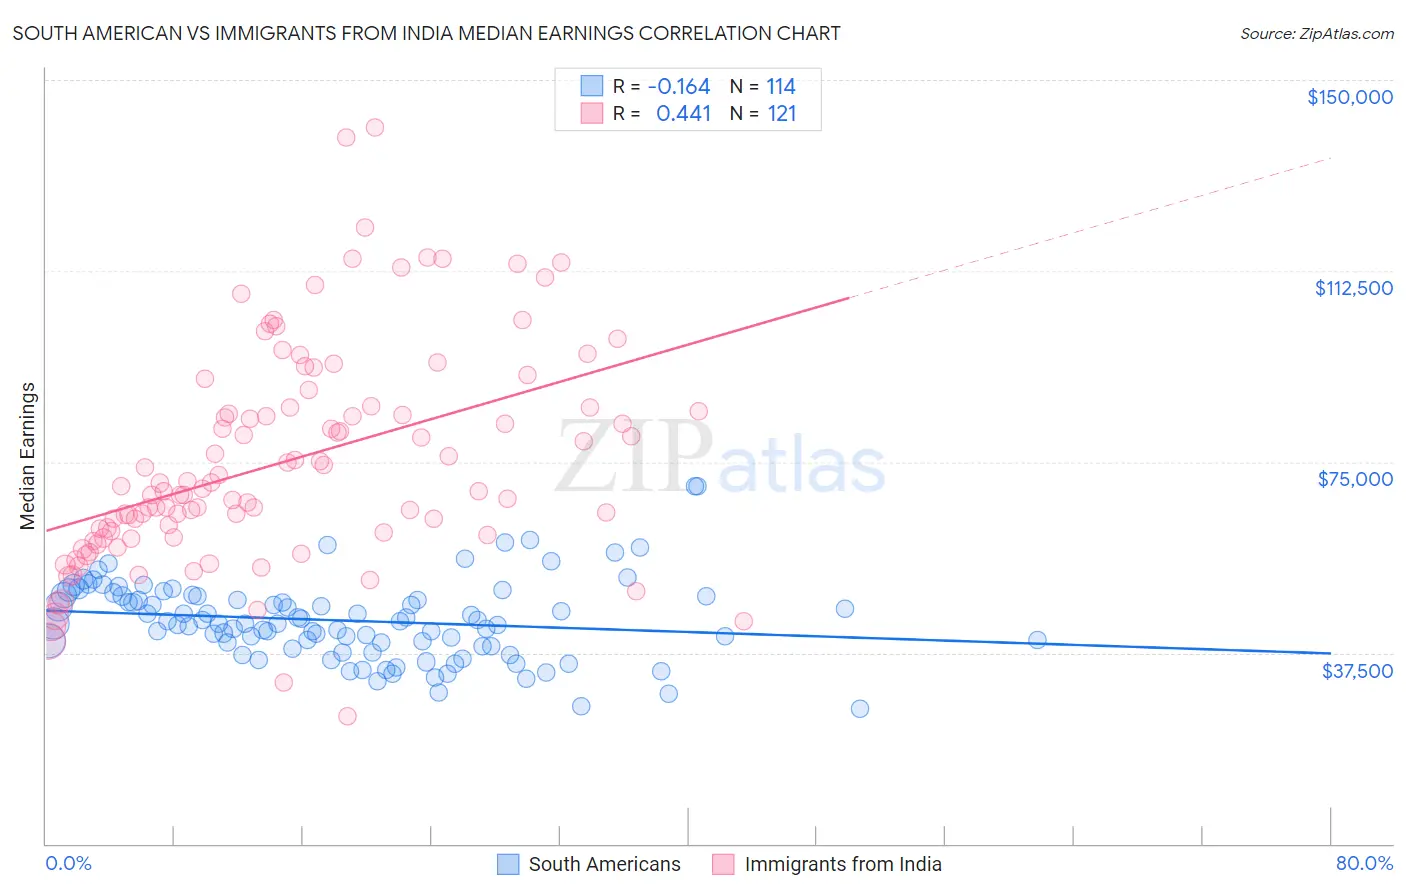 South American vs Immigrants from India Median Earnings